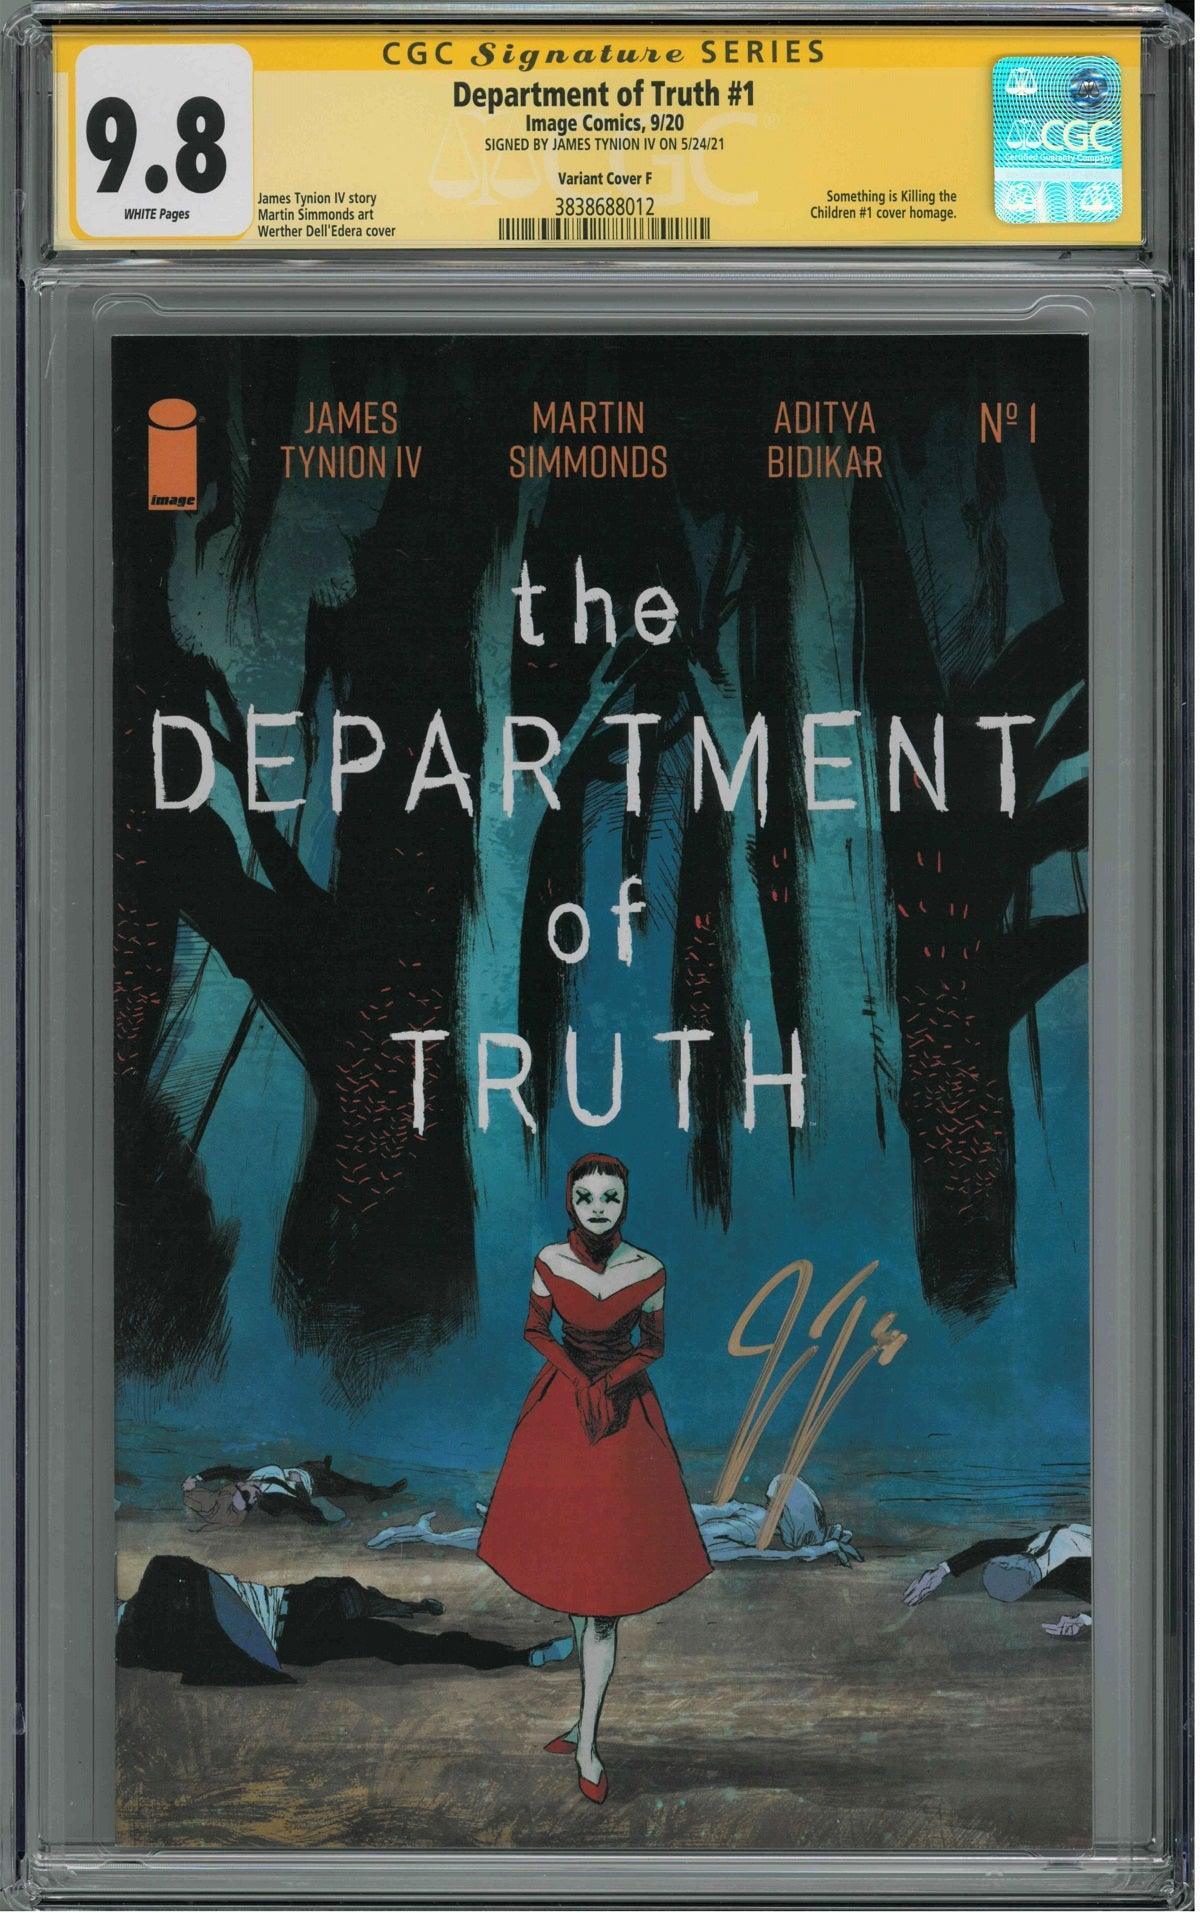 CGC DEPARTMENT OF TRUTH #1 VARIANT CVR F 1:100 (9.8) SIGNATURE SERIES - SIGNED BY JAMES TYNION IV - Kings Comics